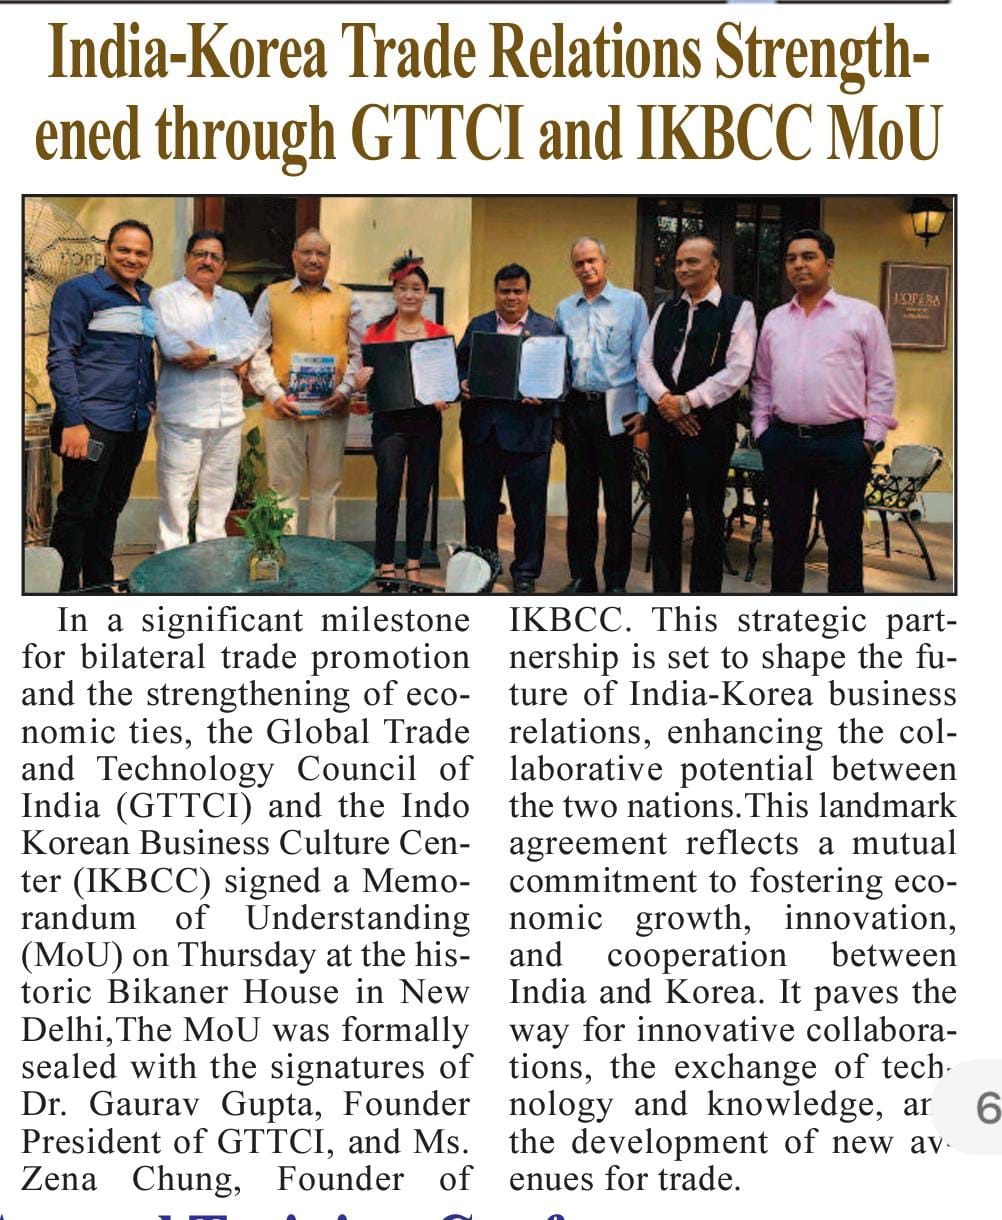 <strong></noscript>India-Korea Trade Relations Strengthened through GTTCI and IKBCC MoU</strong>